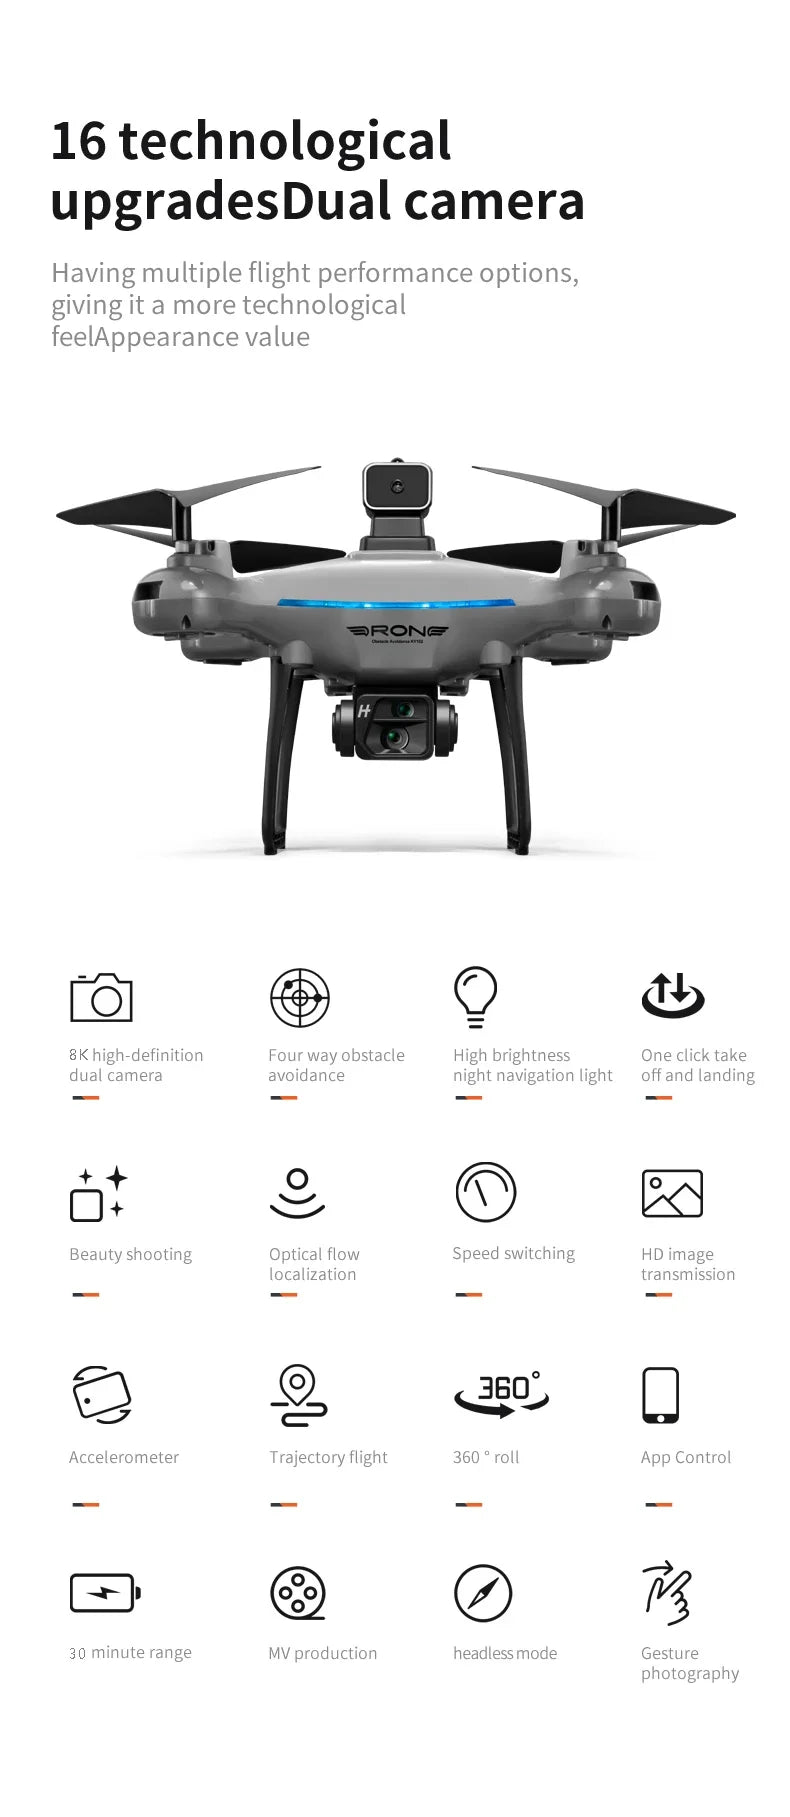 MIJIA KY102 Drone 8K Profesional Dual-Camera Aerial Photography 360 Obstacle Avoidance Optical Flow Four-Axis RC Aircraft ShopOnlyDeal